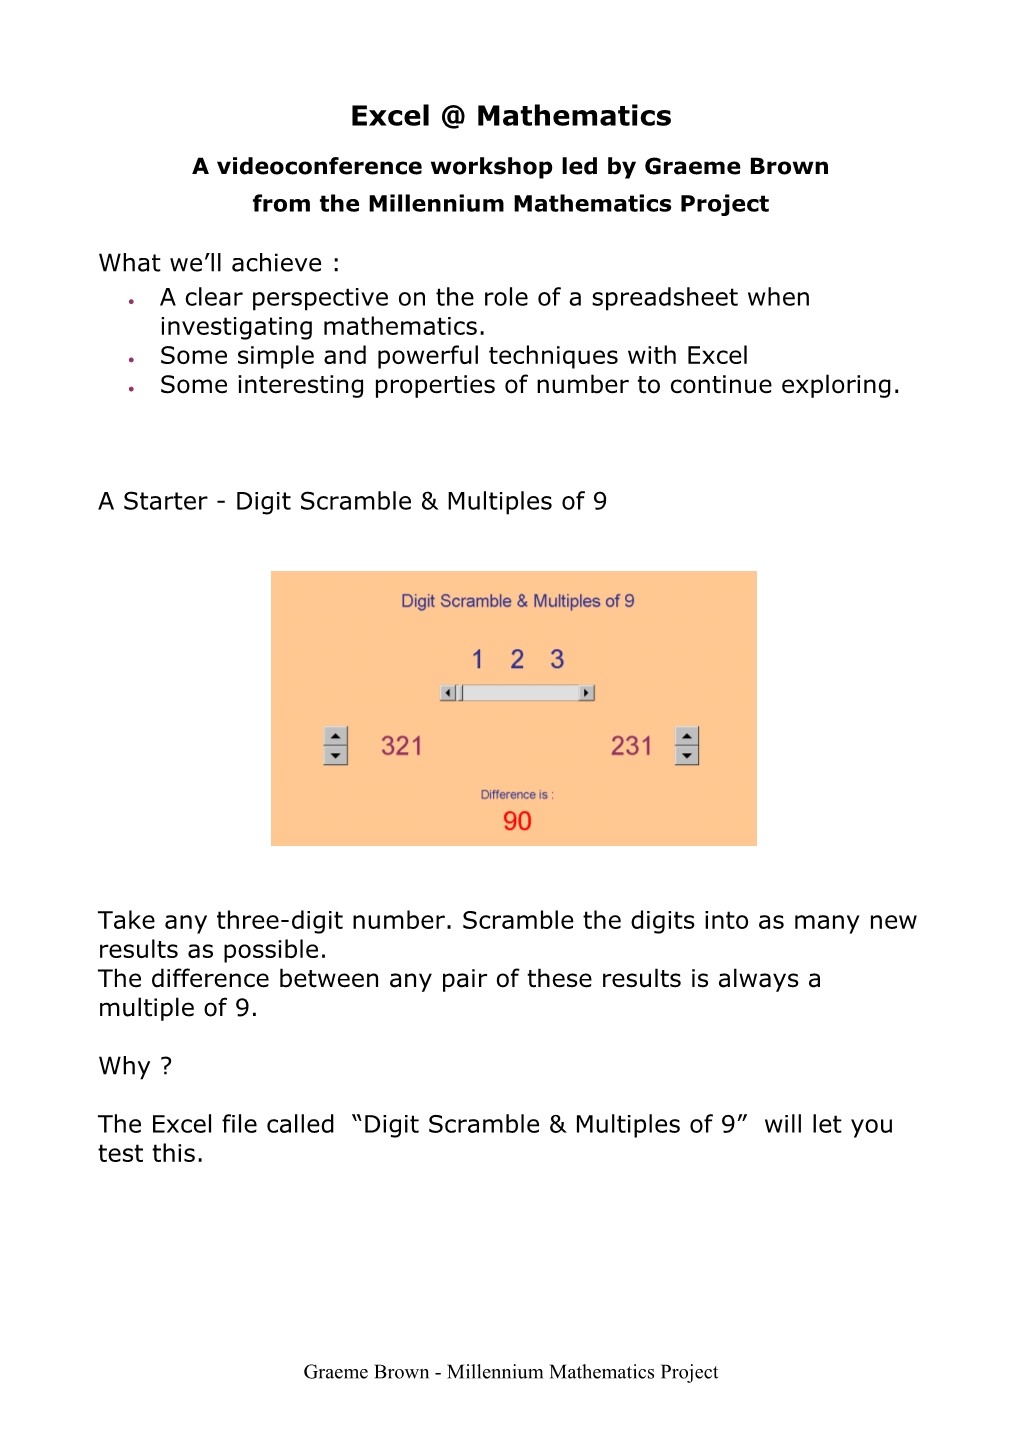 Factors, Multiples, and Remainders